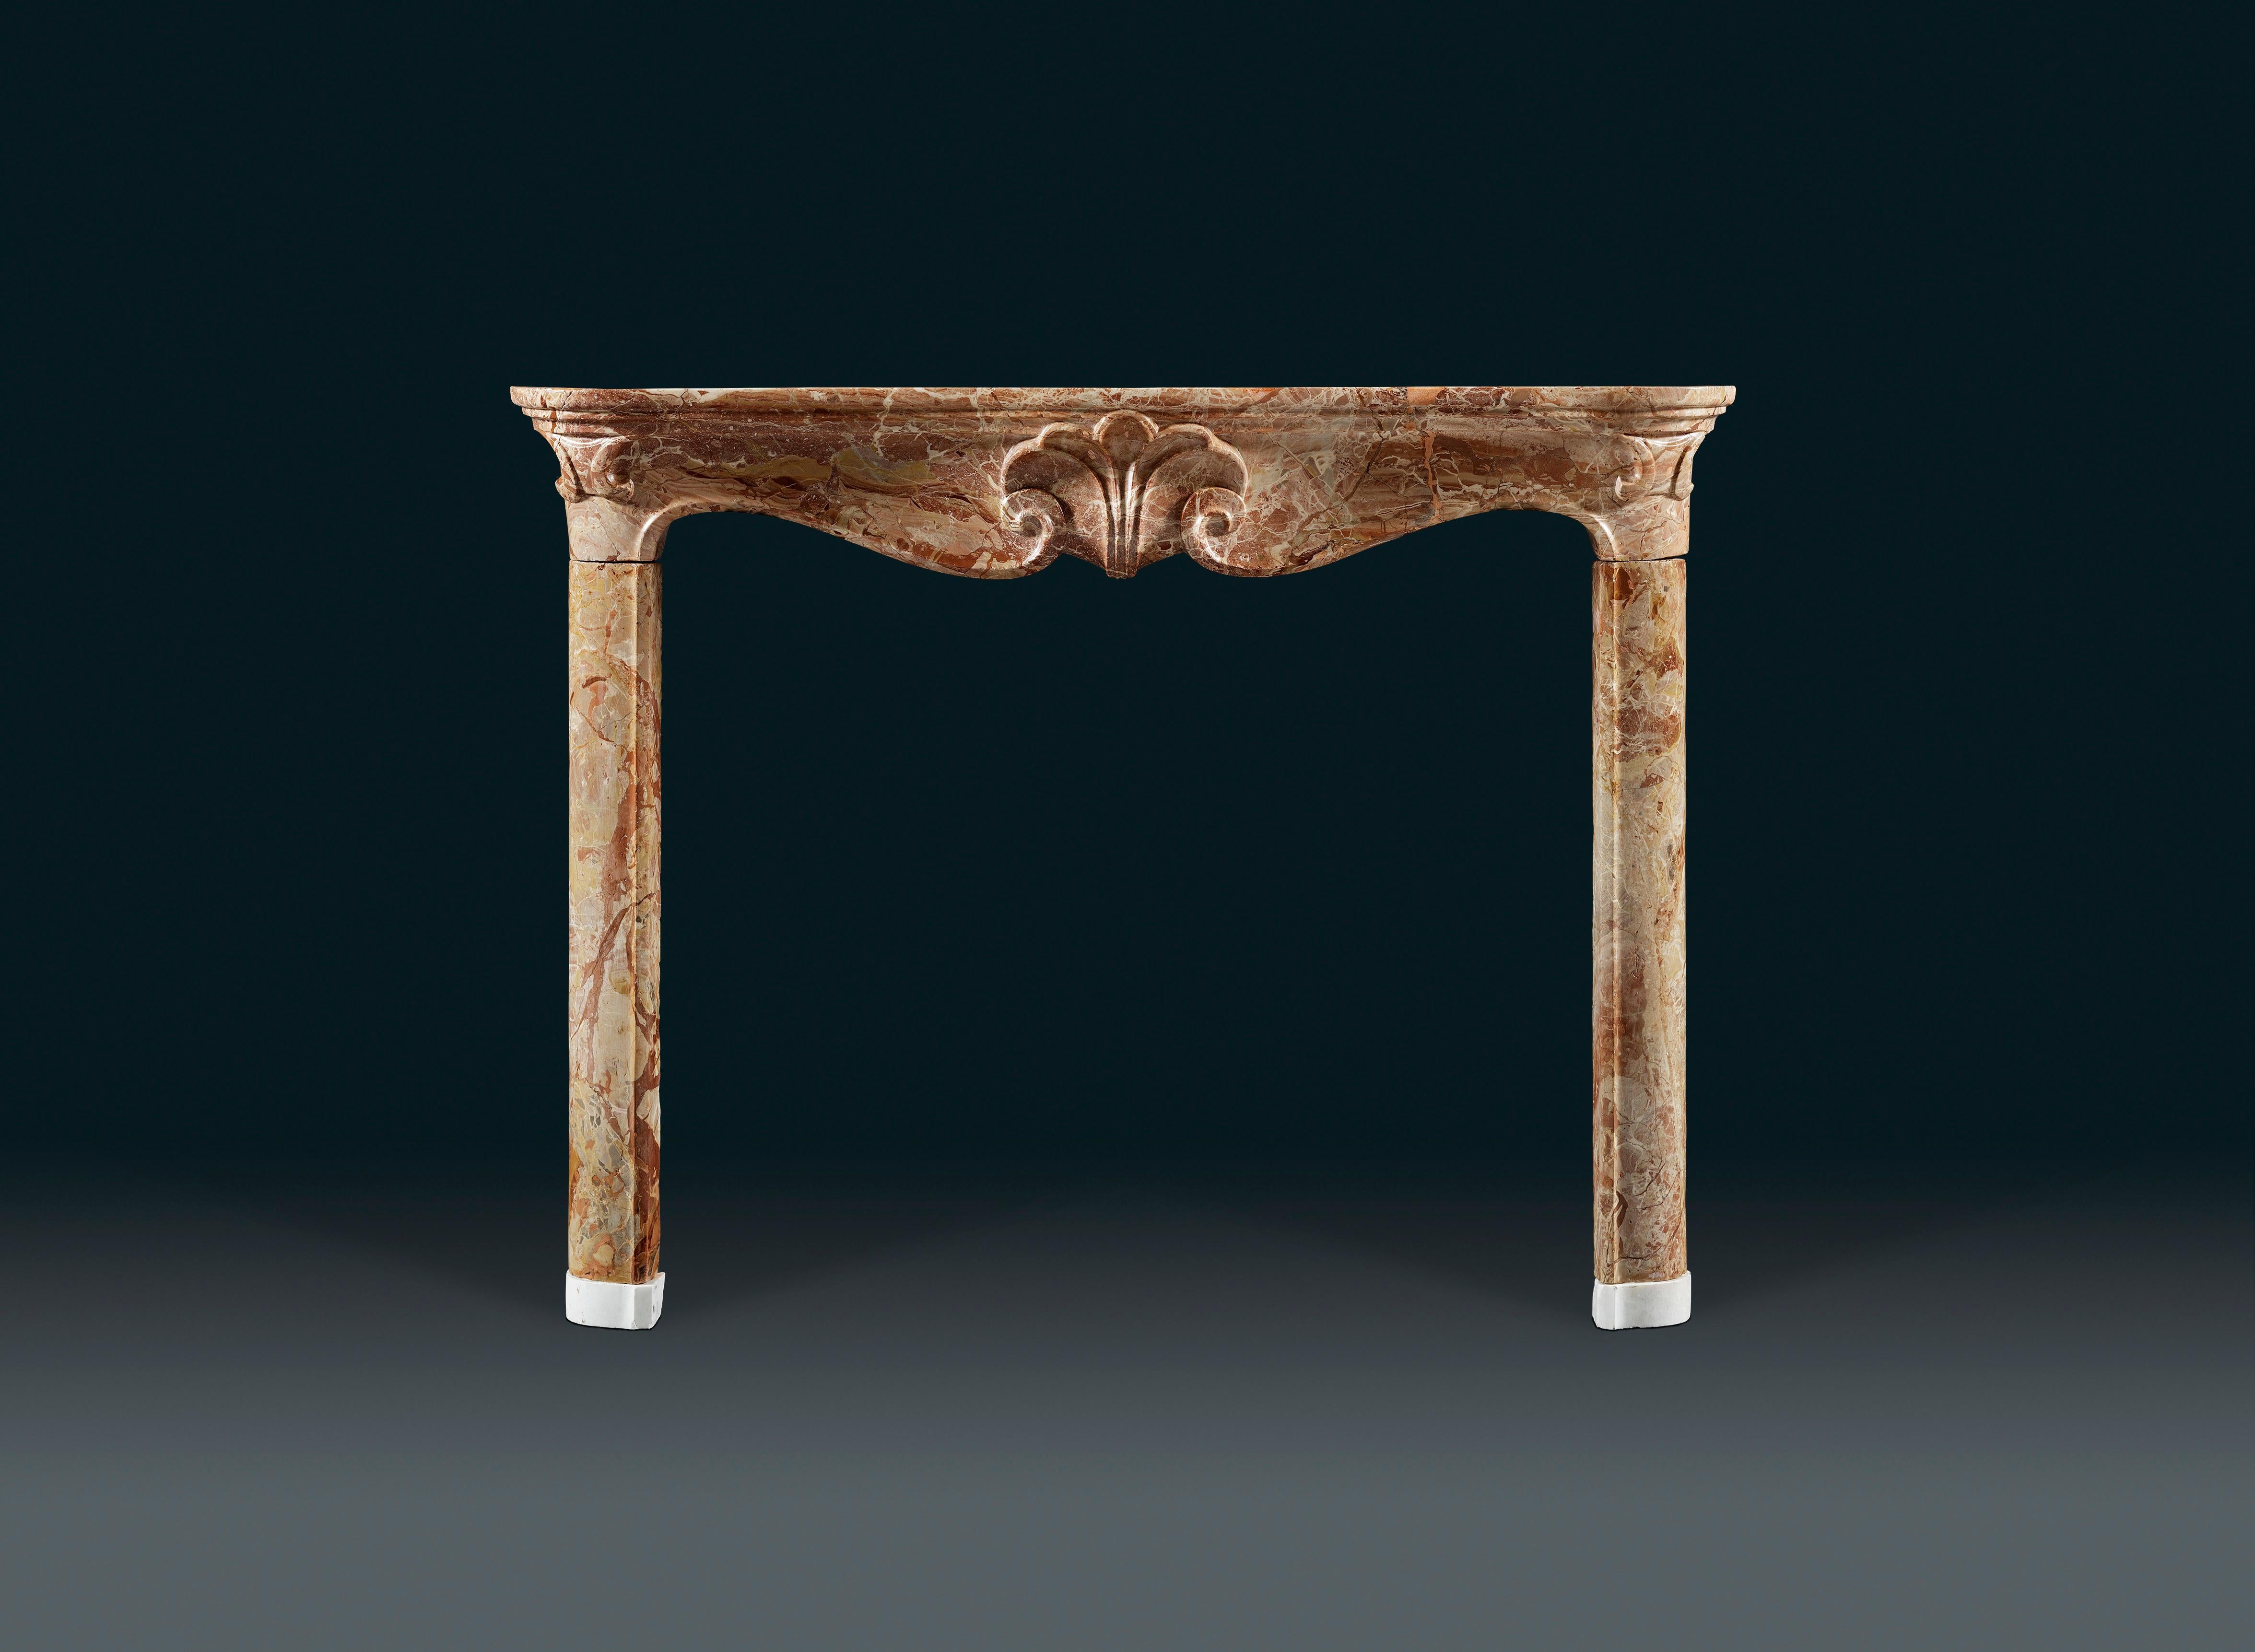 An 18th Century Louis XV mantle in Jasper marble, the curved shelf above a serpentine frieze carved in the solid, centred by a floral motif. The whole on elegant Statuary marble footblocks